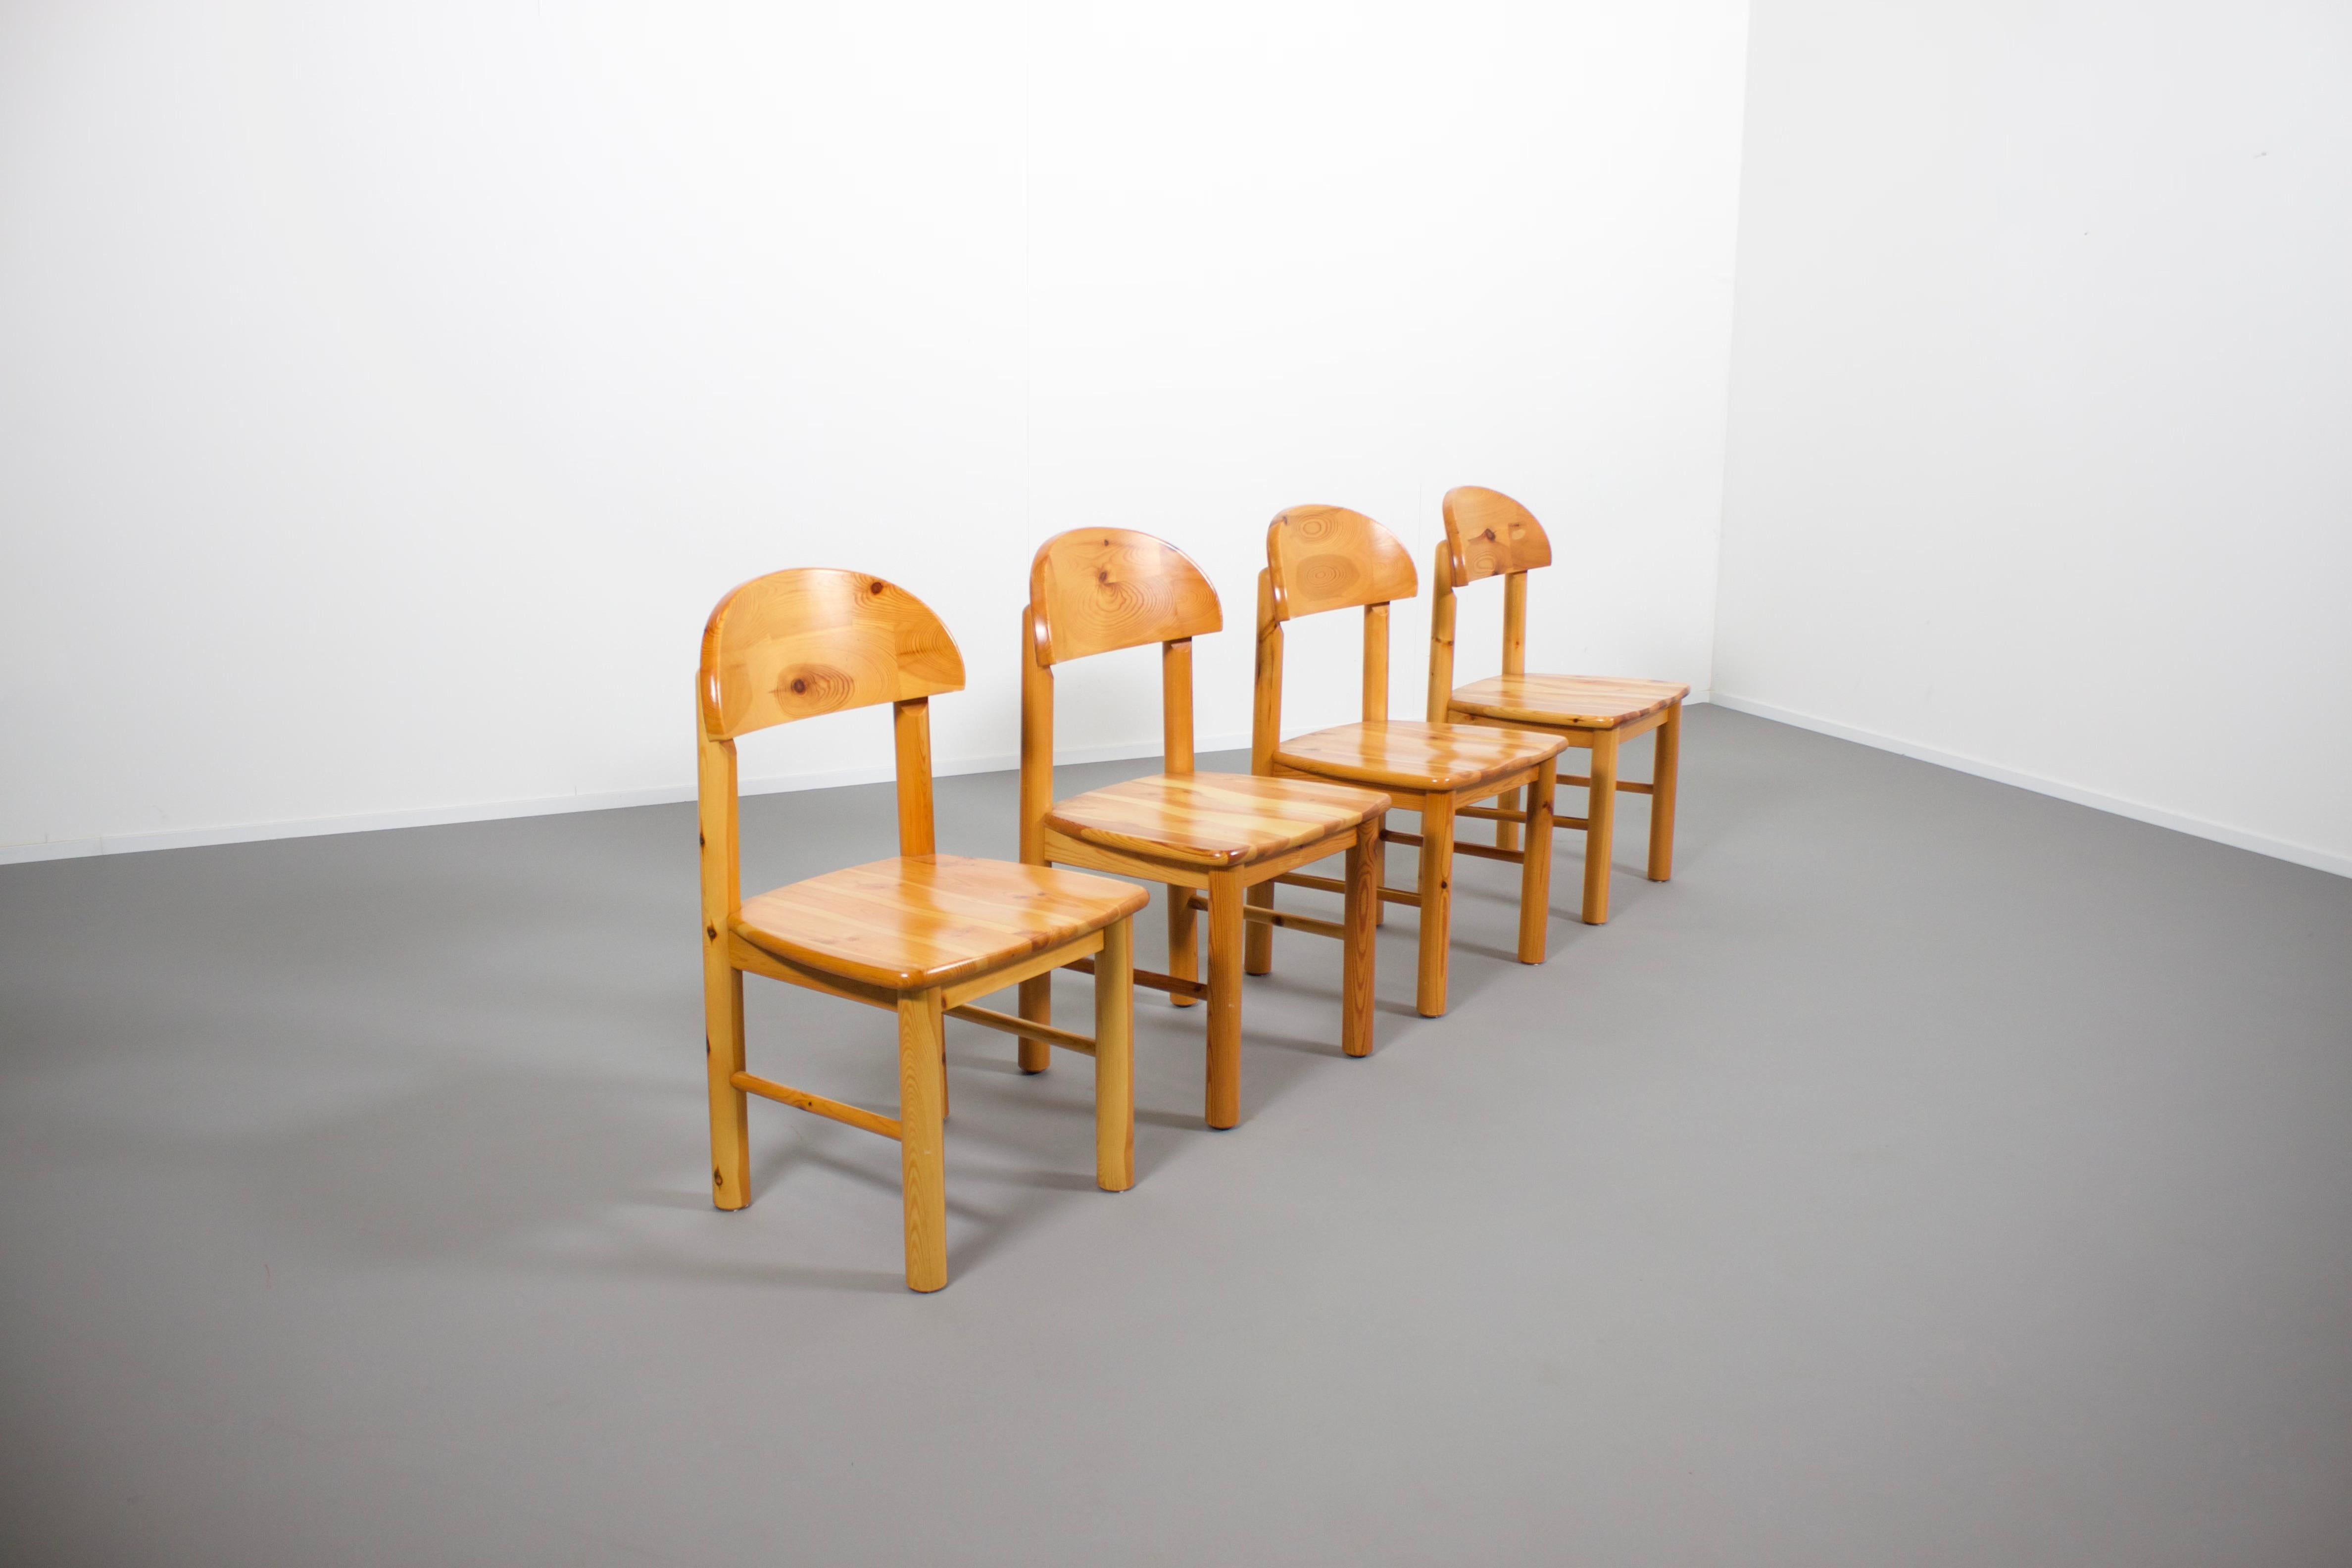 Set of four solid pine wood chairs in very good condition.

Designed by Rainer Daumiller and manufactured by Hirtshals Savvaerk in the 1970s 

The chairs have a carved seat and backrest which give them a robust and organic appearance.

The rustic